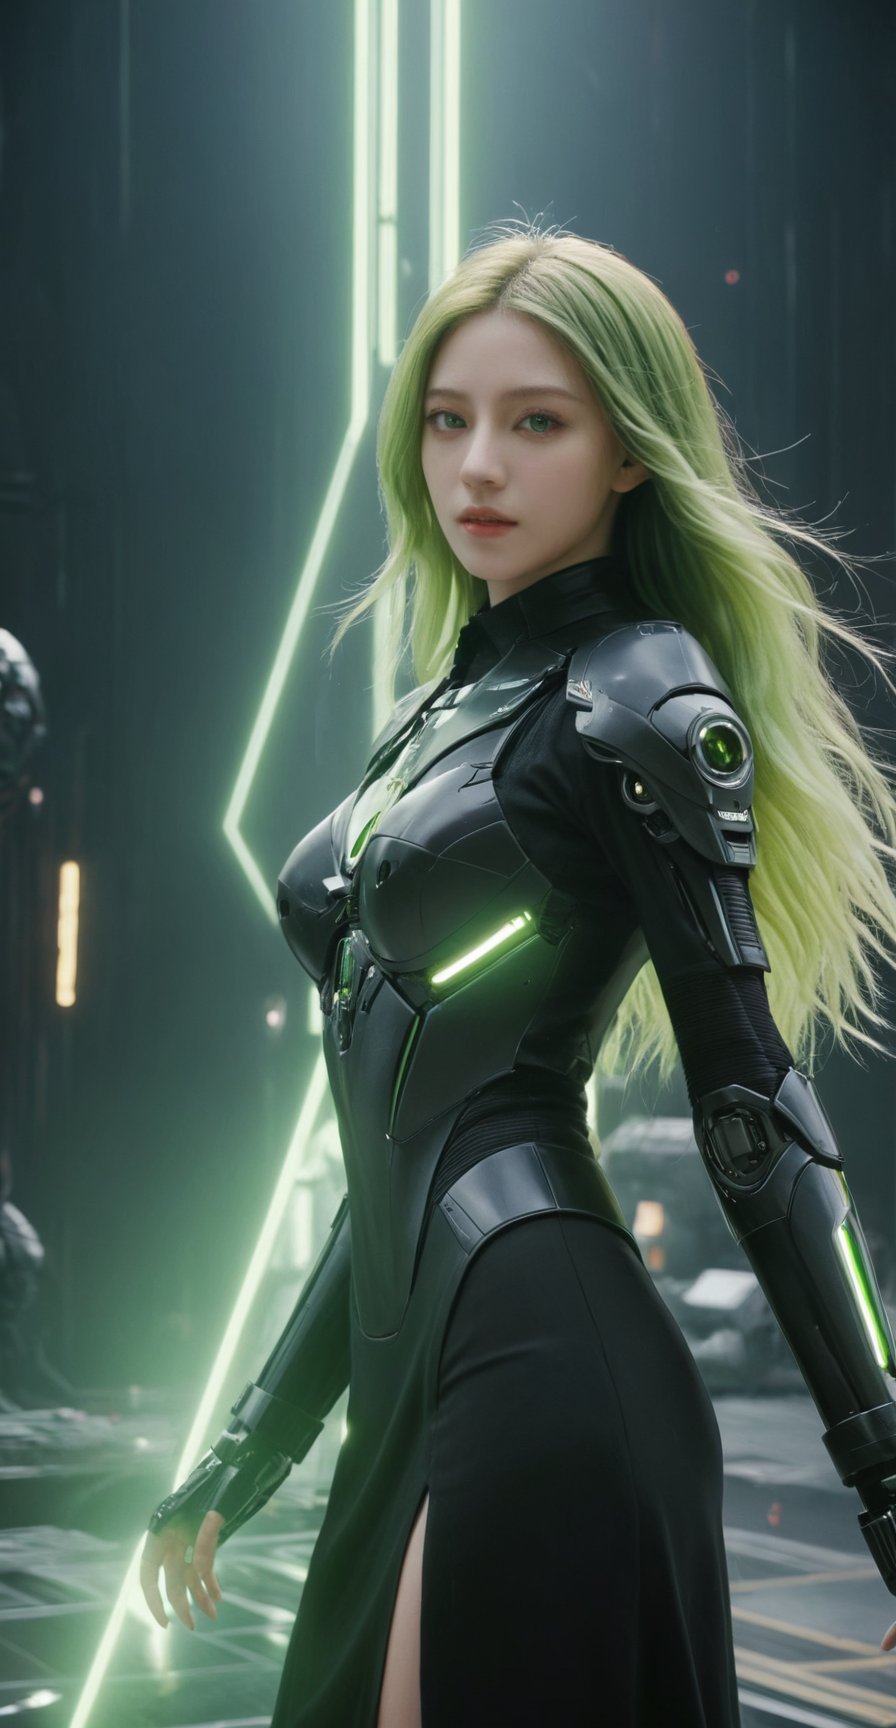 (ultra realistic,best quality),photorealistic,Extremely Realistic, in depth, cinematic light,mecha\(hubggirl)\,

Green eyes, lime green long hair. black_liquid_dress. ruins tech, spaceship. cinematic, particles, ethereal glow, atmosphere, volumetric lighting. sharp eyes,

particle effects, perfect hands, perfect lighting, vibrant colors, 
intricate details, high detailed skin, 
intricate background, realism, realistic, raw, analog, taken by Canon EOS,SIGMA Art Lens 35mm F1.4,ISO 200 Shutter Speed 2000,Vivid picture,